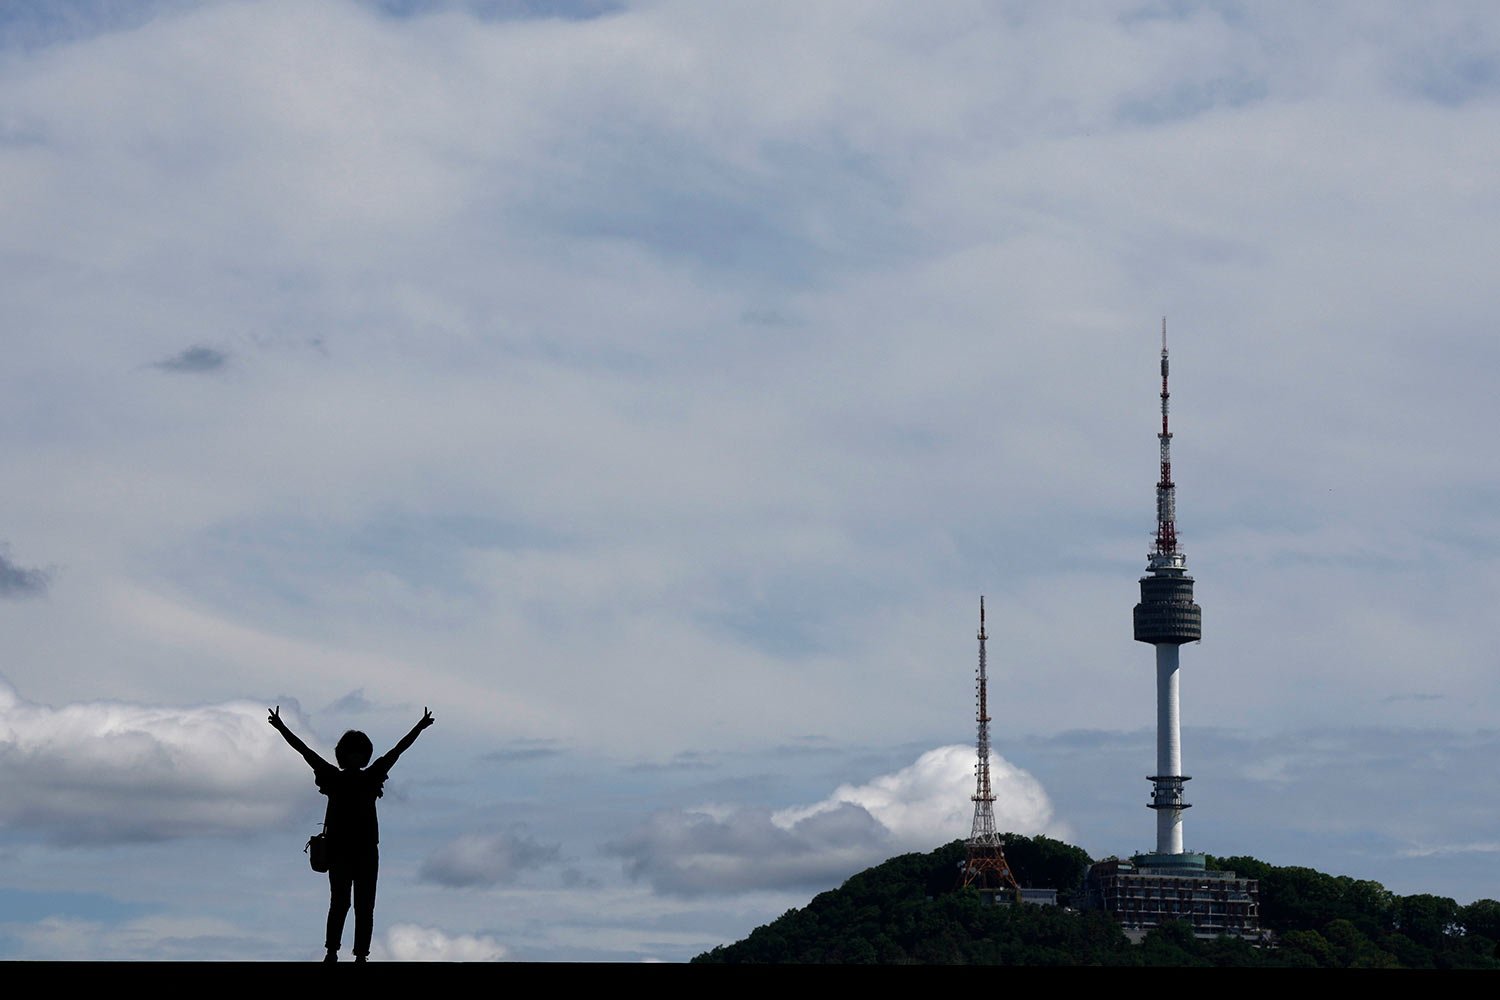  A woman poses for a souvenir photo as she is silhouetted against the sky and the iconic N Seoul Tower at the National Museum of Korea in Seoul, South Korea, Tuesday, June 7, 2022. (AP Photo/Lee Jin-man) 